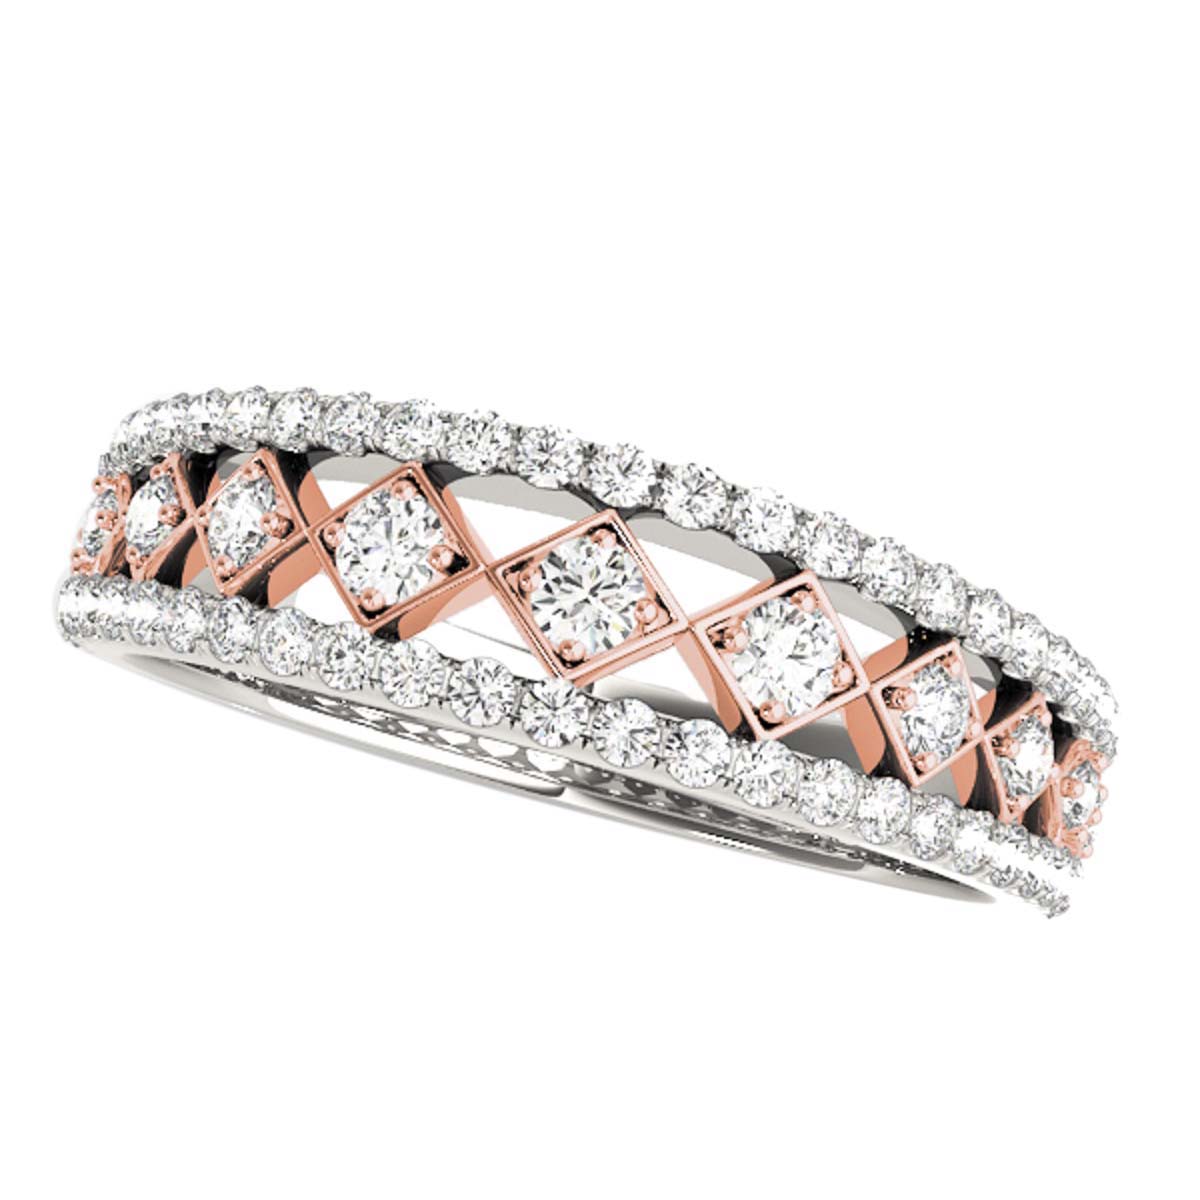 Aone 0.35 Carat Two Tone Diamond Wedding Band In 14K Solid Rose & White Gold